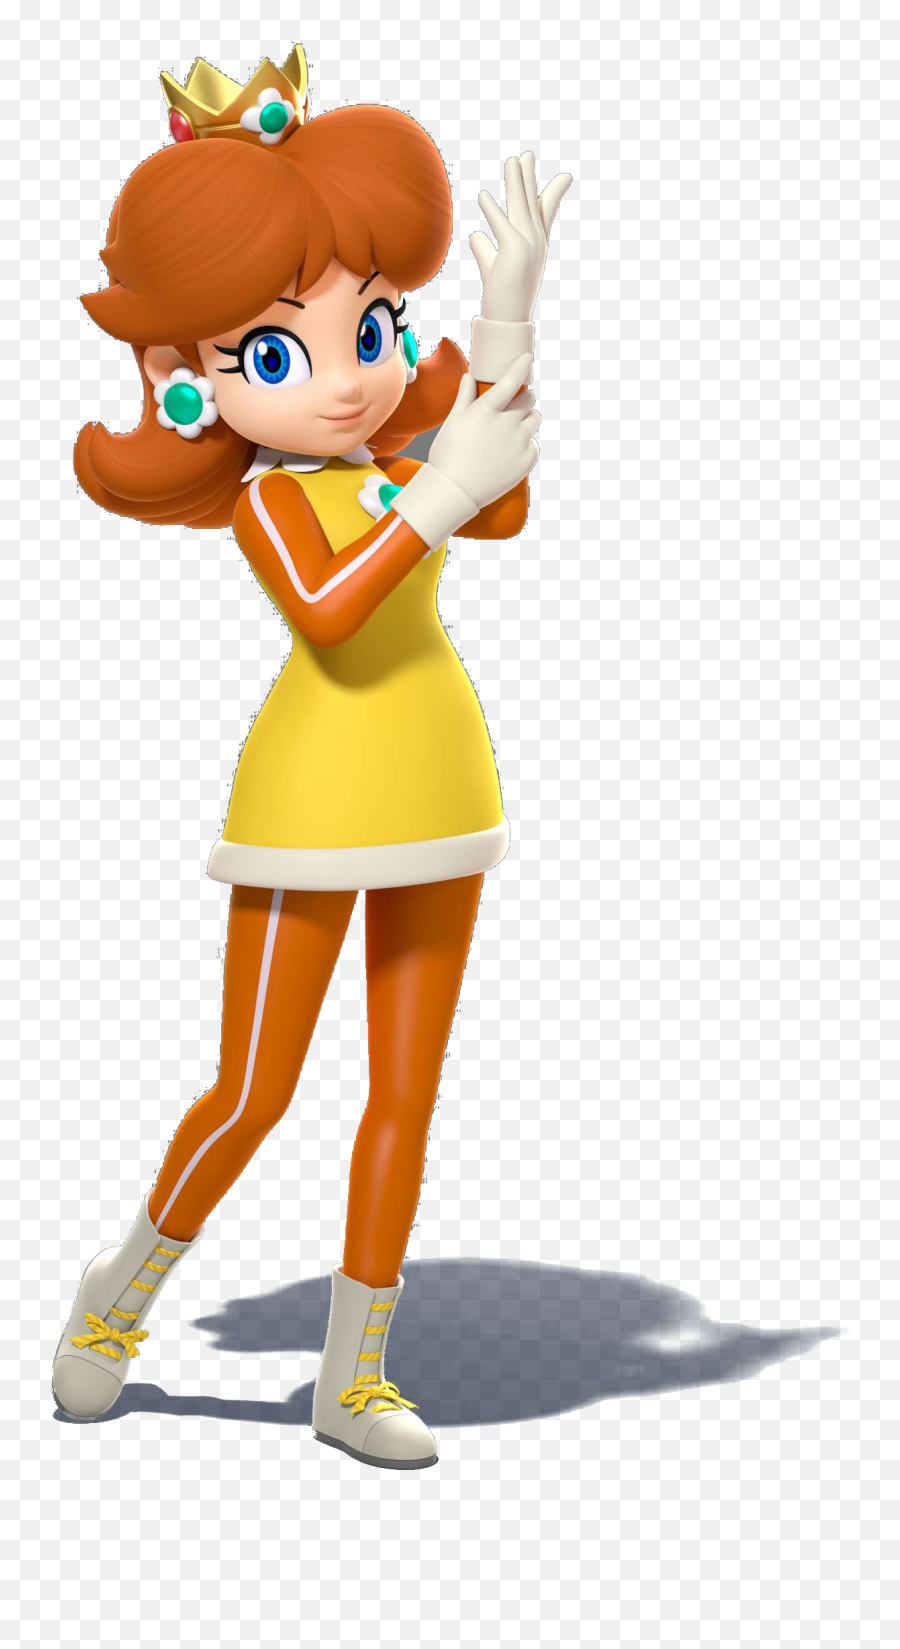 Princess Daisy - Mario And Sonic At The Olympic Games Princess Daisy Png,Princess Daisy Png